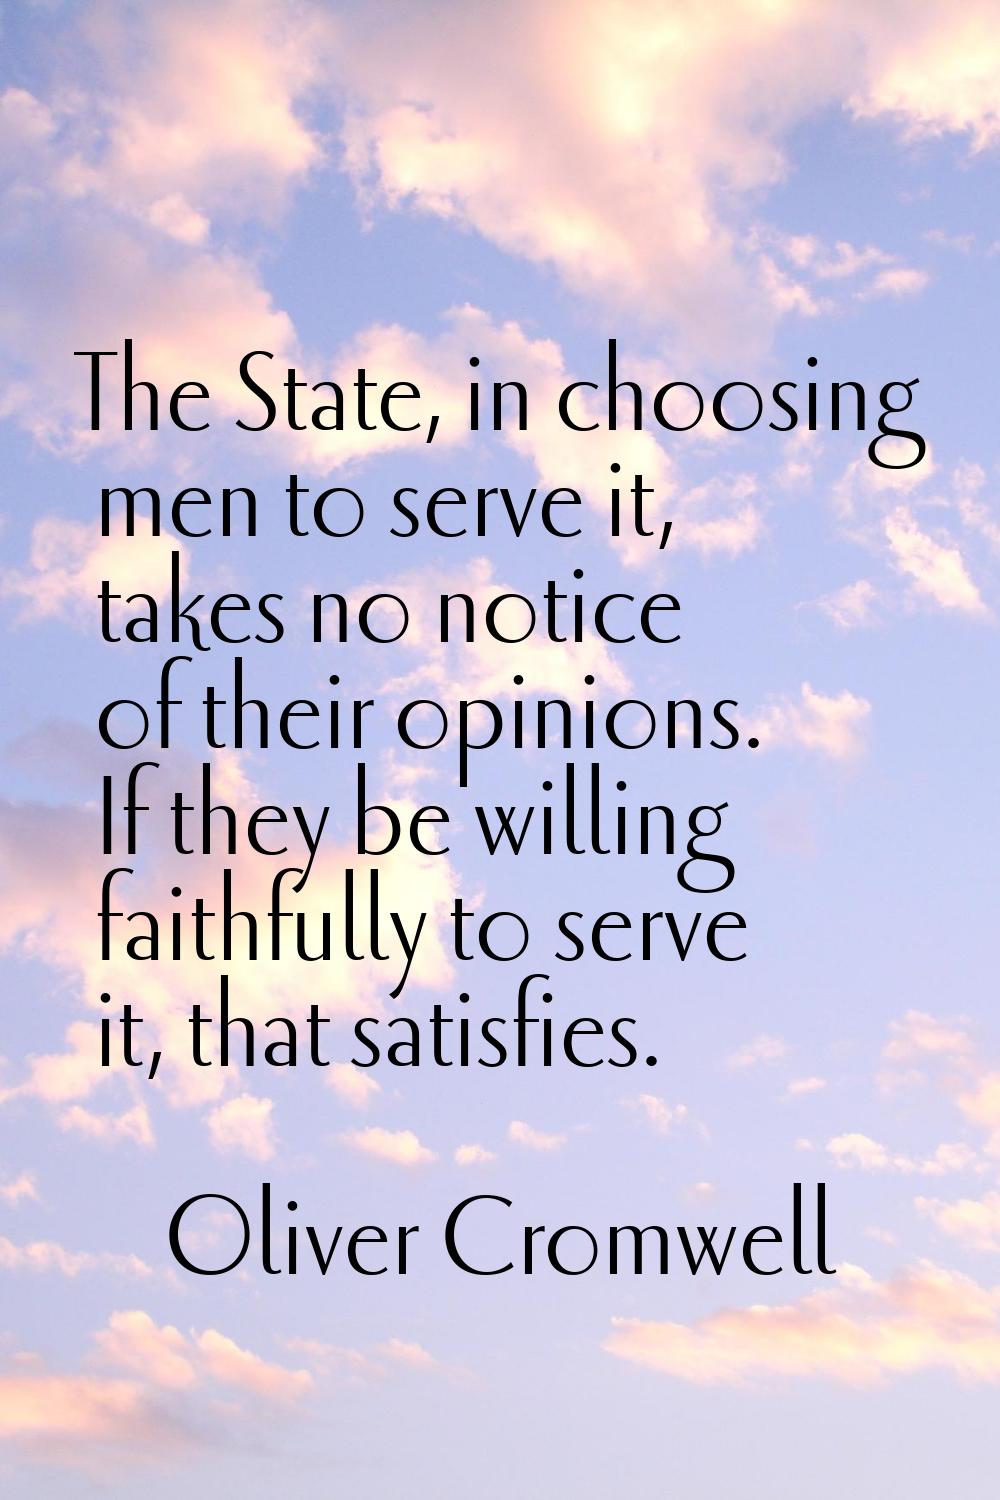 The State, in choosing men to serve it, takes no notice of their opinions. If they be willing faith